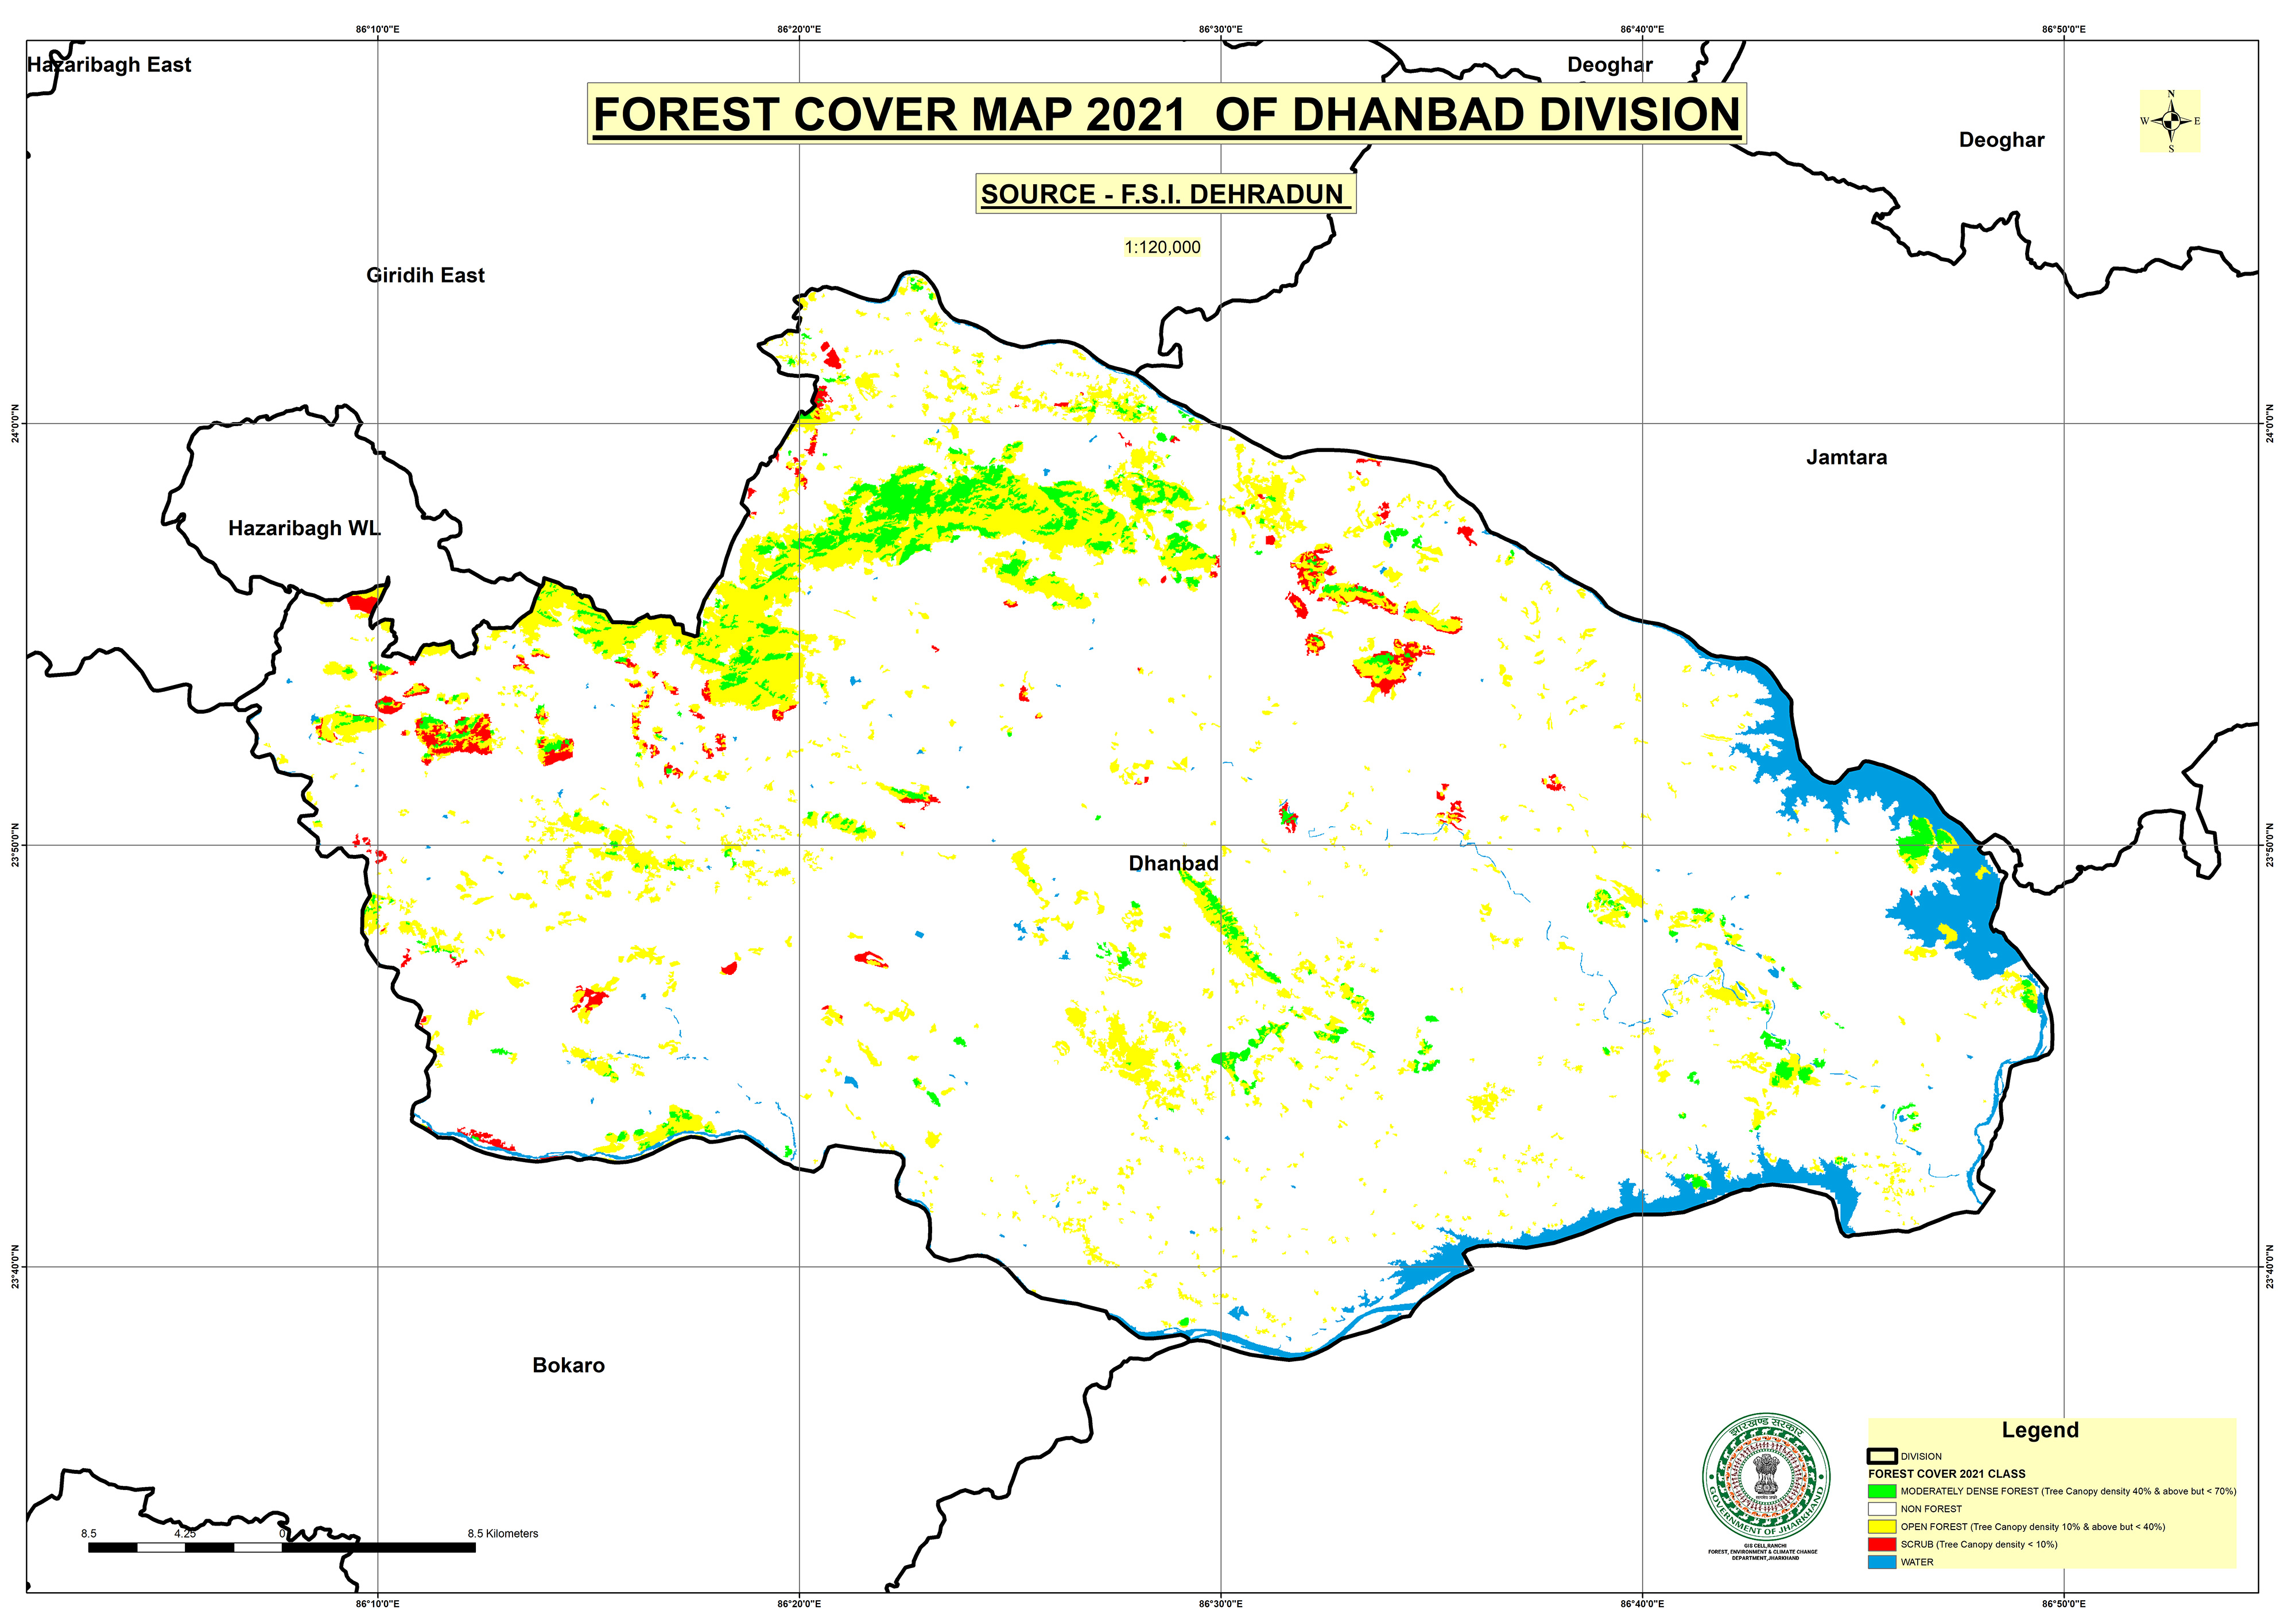 Forest Cover Map of Dhanbad Jharkhand